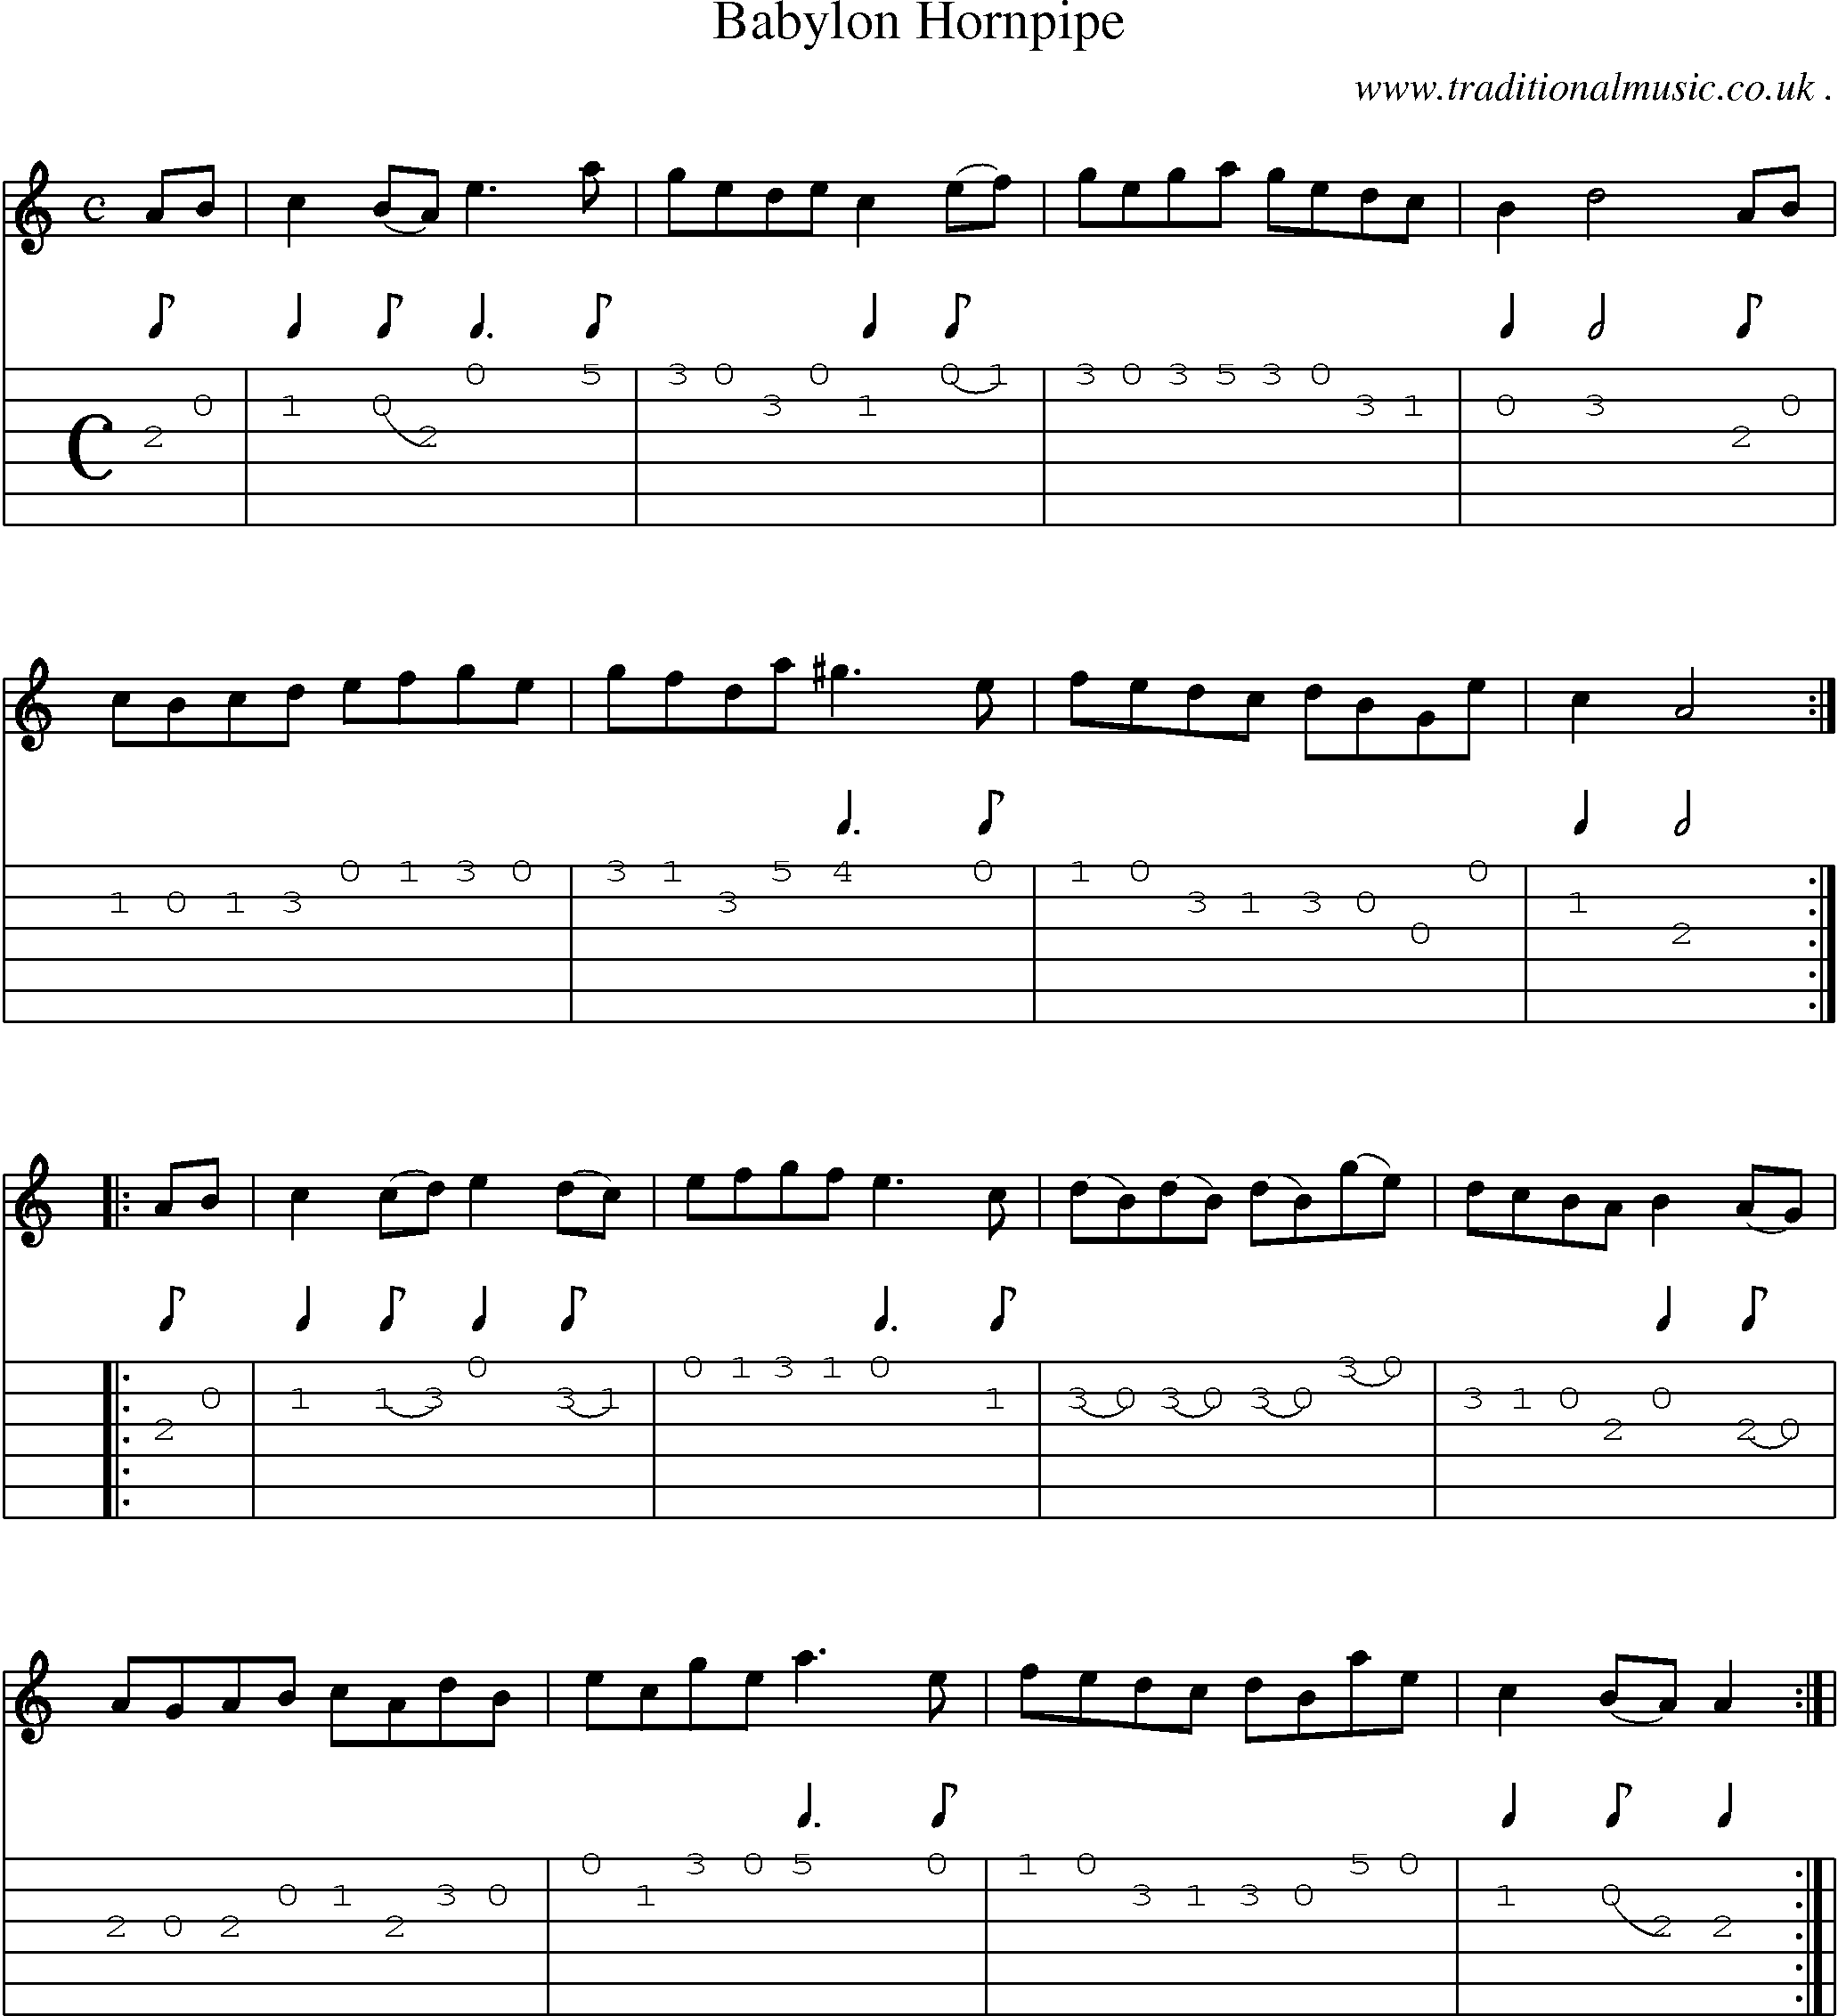 Sheet-Music and Guitar Tabs for Babylon Hornpipe